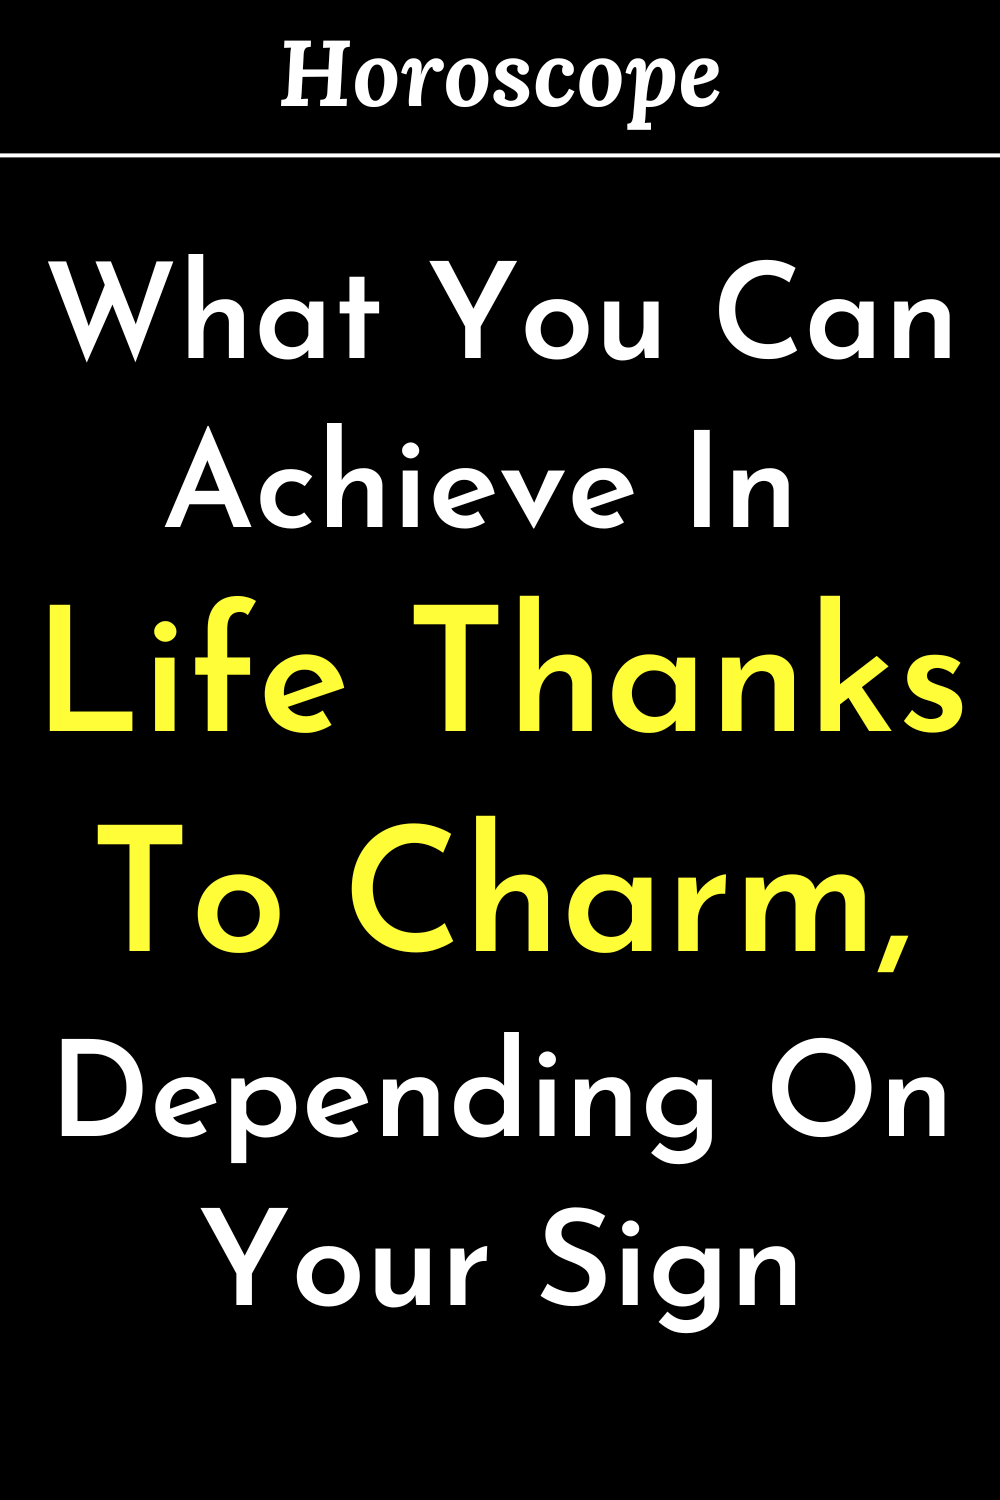 What You Can Achieve In Life Thanks To Charm, Depending On Your Sign